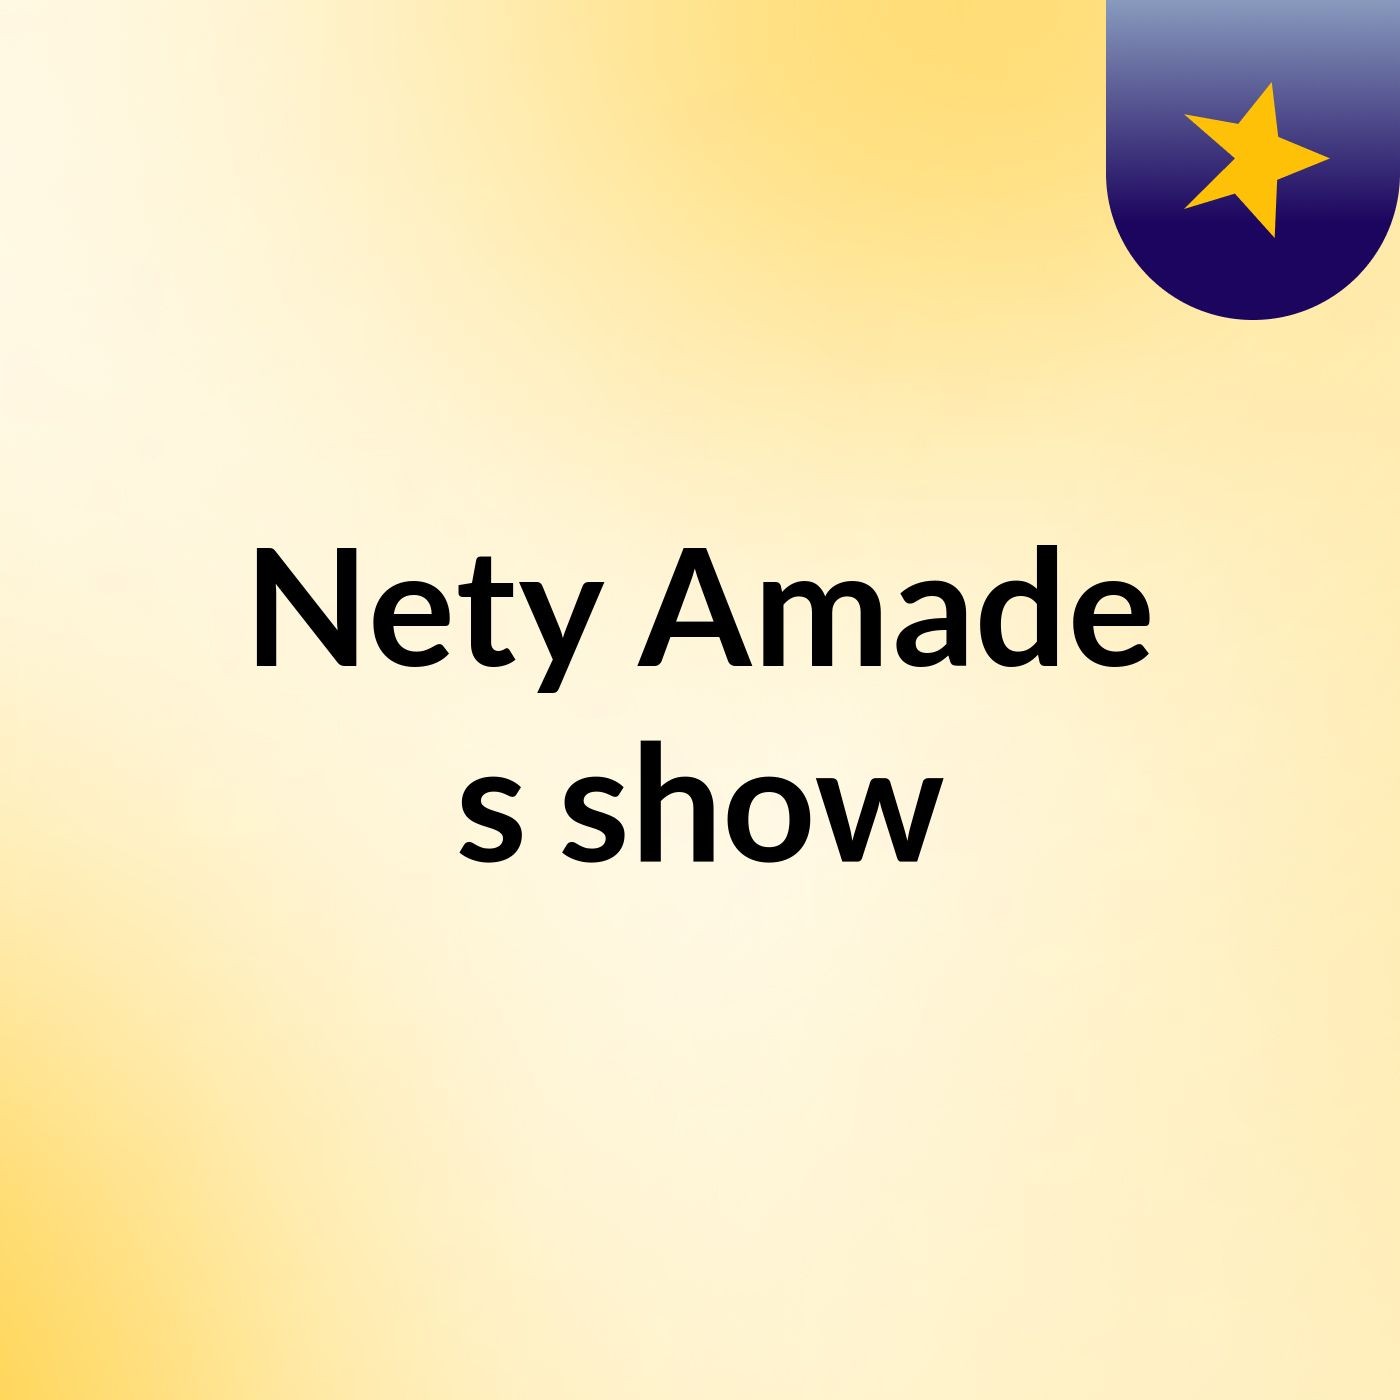 Nety Amade's show